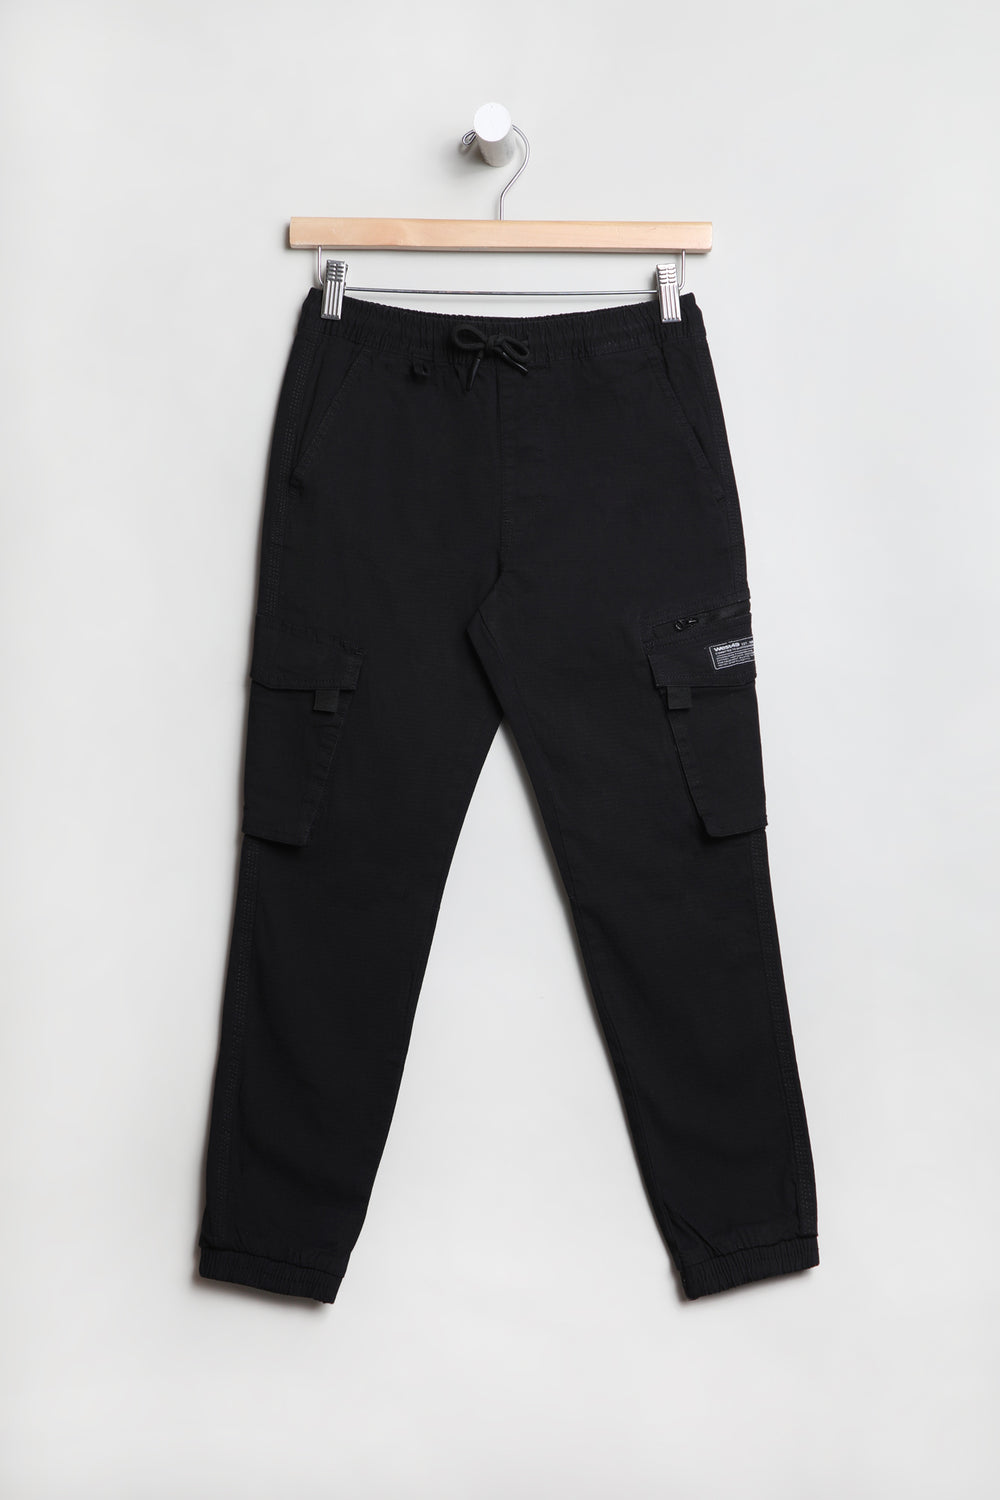 West49 Youth Ripstop Cargo Jogger Black